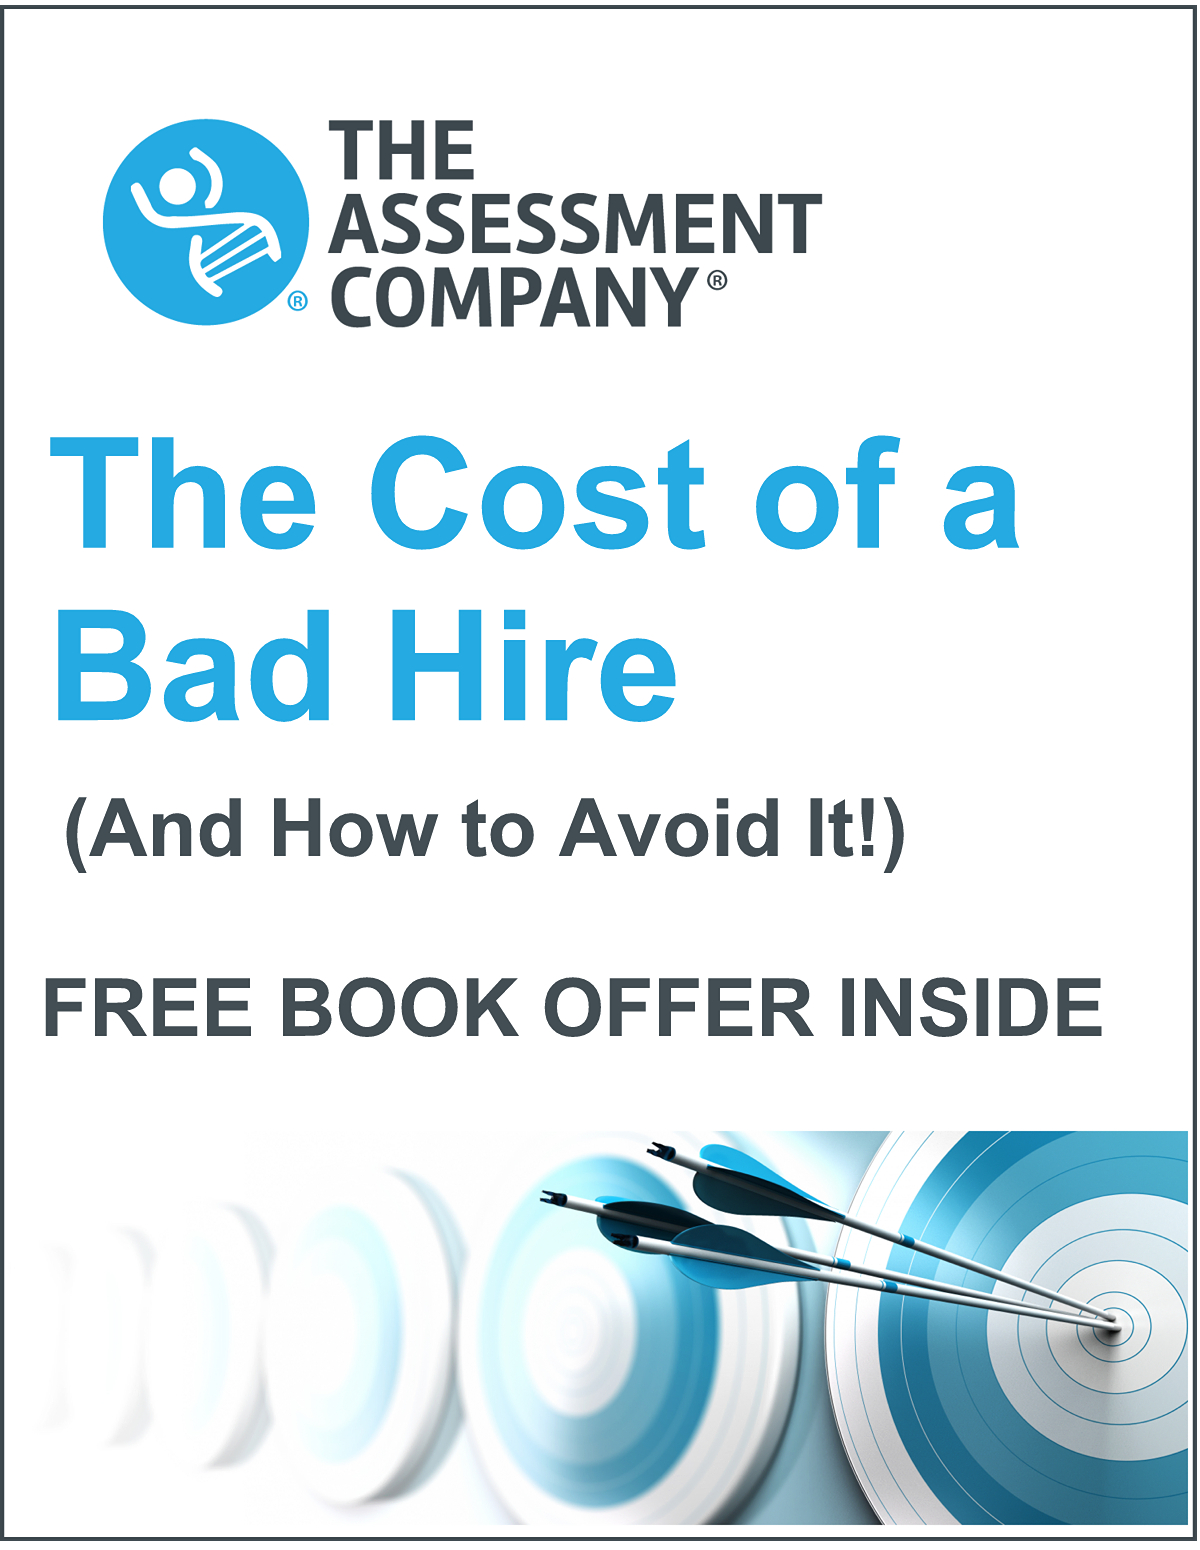 The Cost of a Bad Hire (And How to Avoid It!)